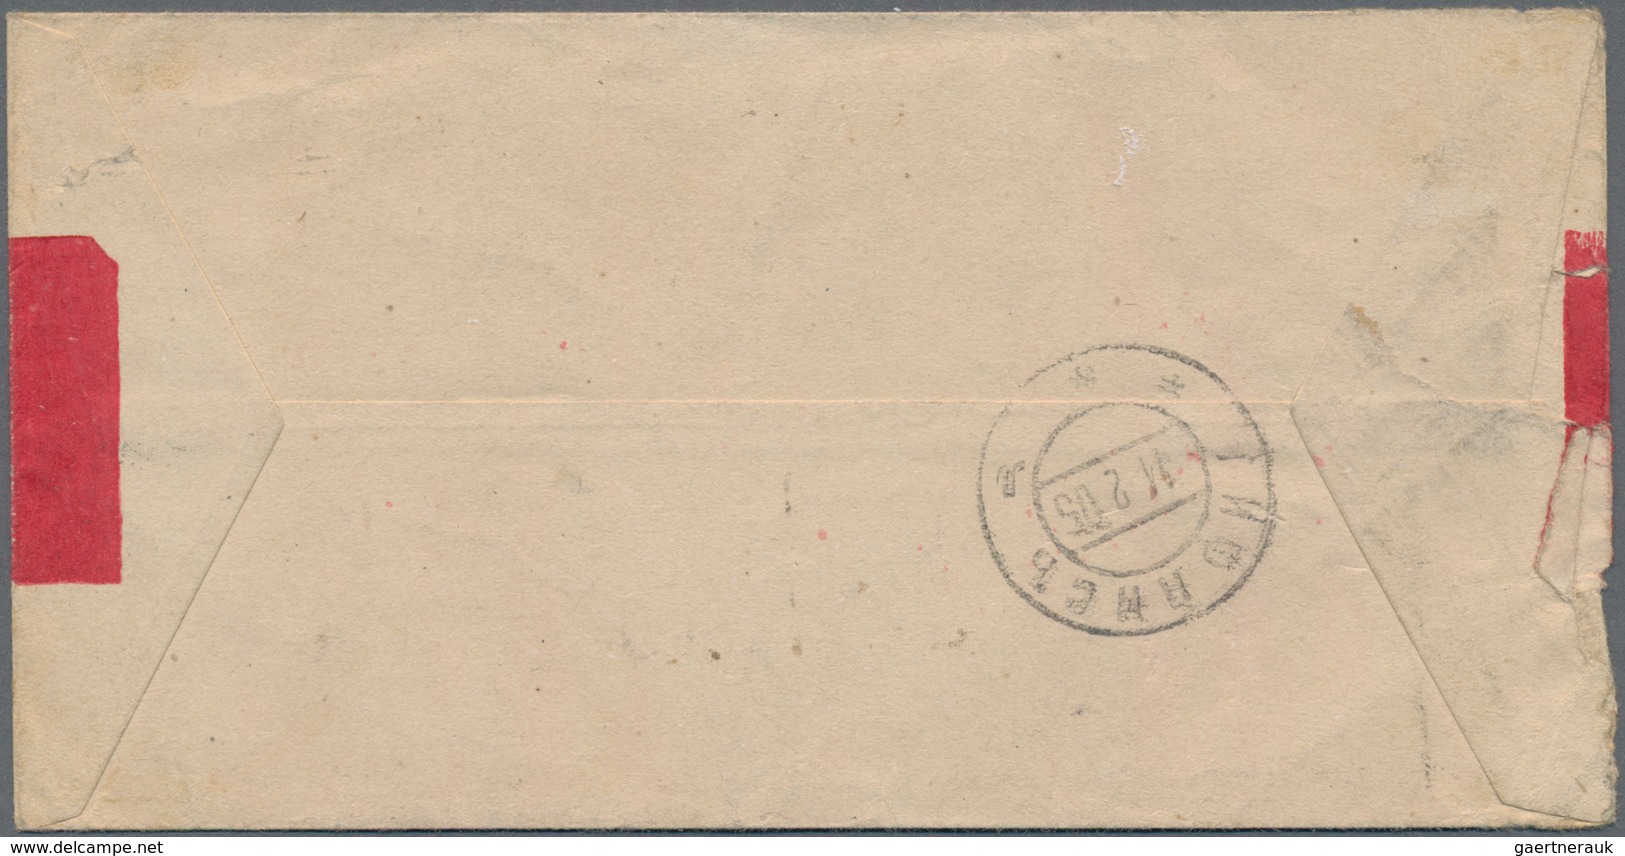 Russische Post In China: 12.01.1905 Red-band Cover From 27th FPO (1) With Violet Circular Cachet "Of - China